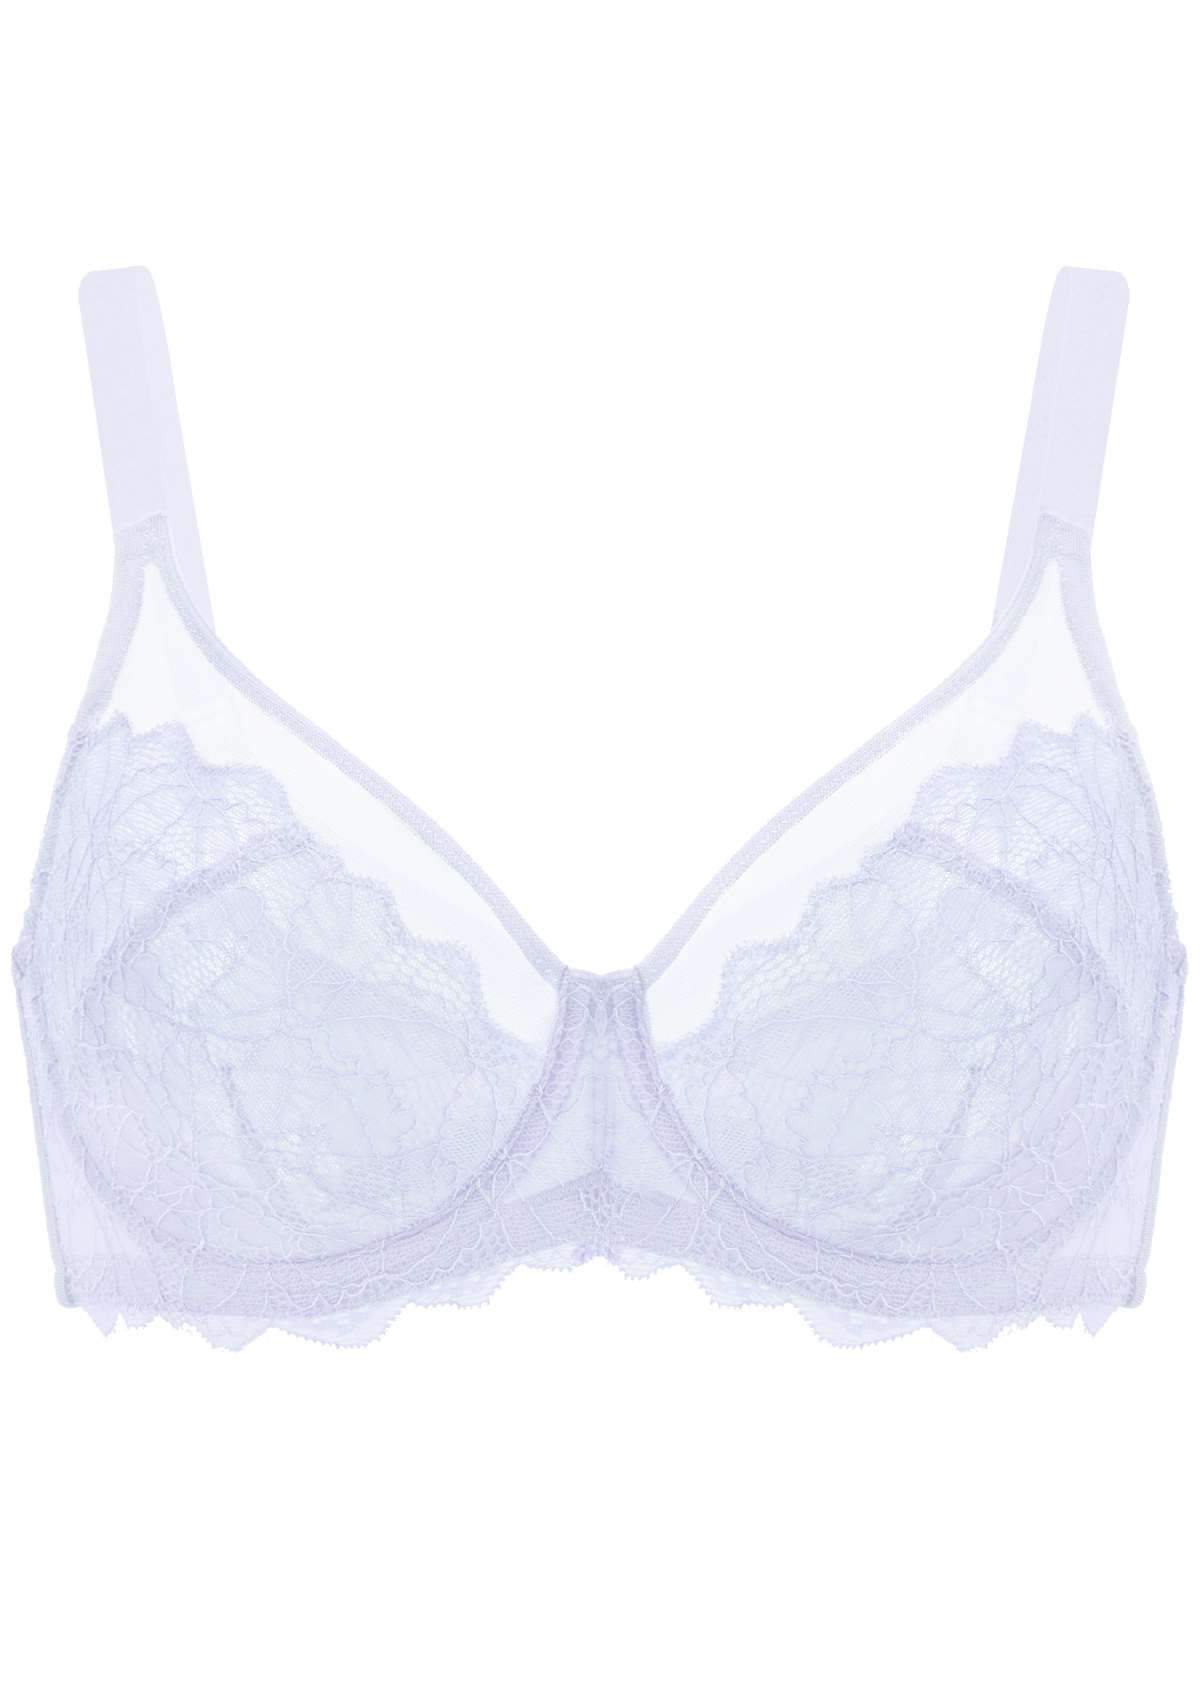 HSIA Wisteria Bra For Lift And Support - Full Coverage Minimizer Bra - Crystal Blue / 34 / D